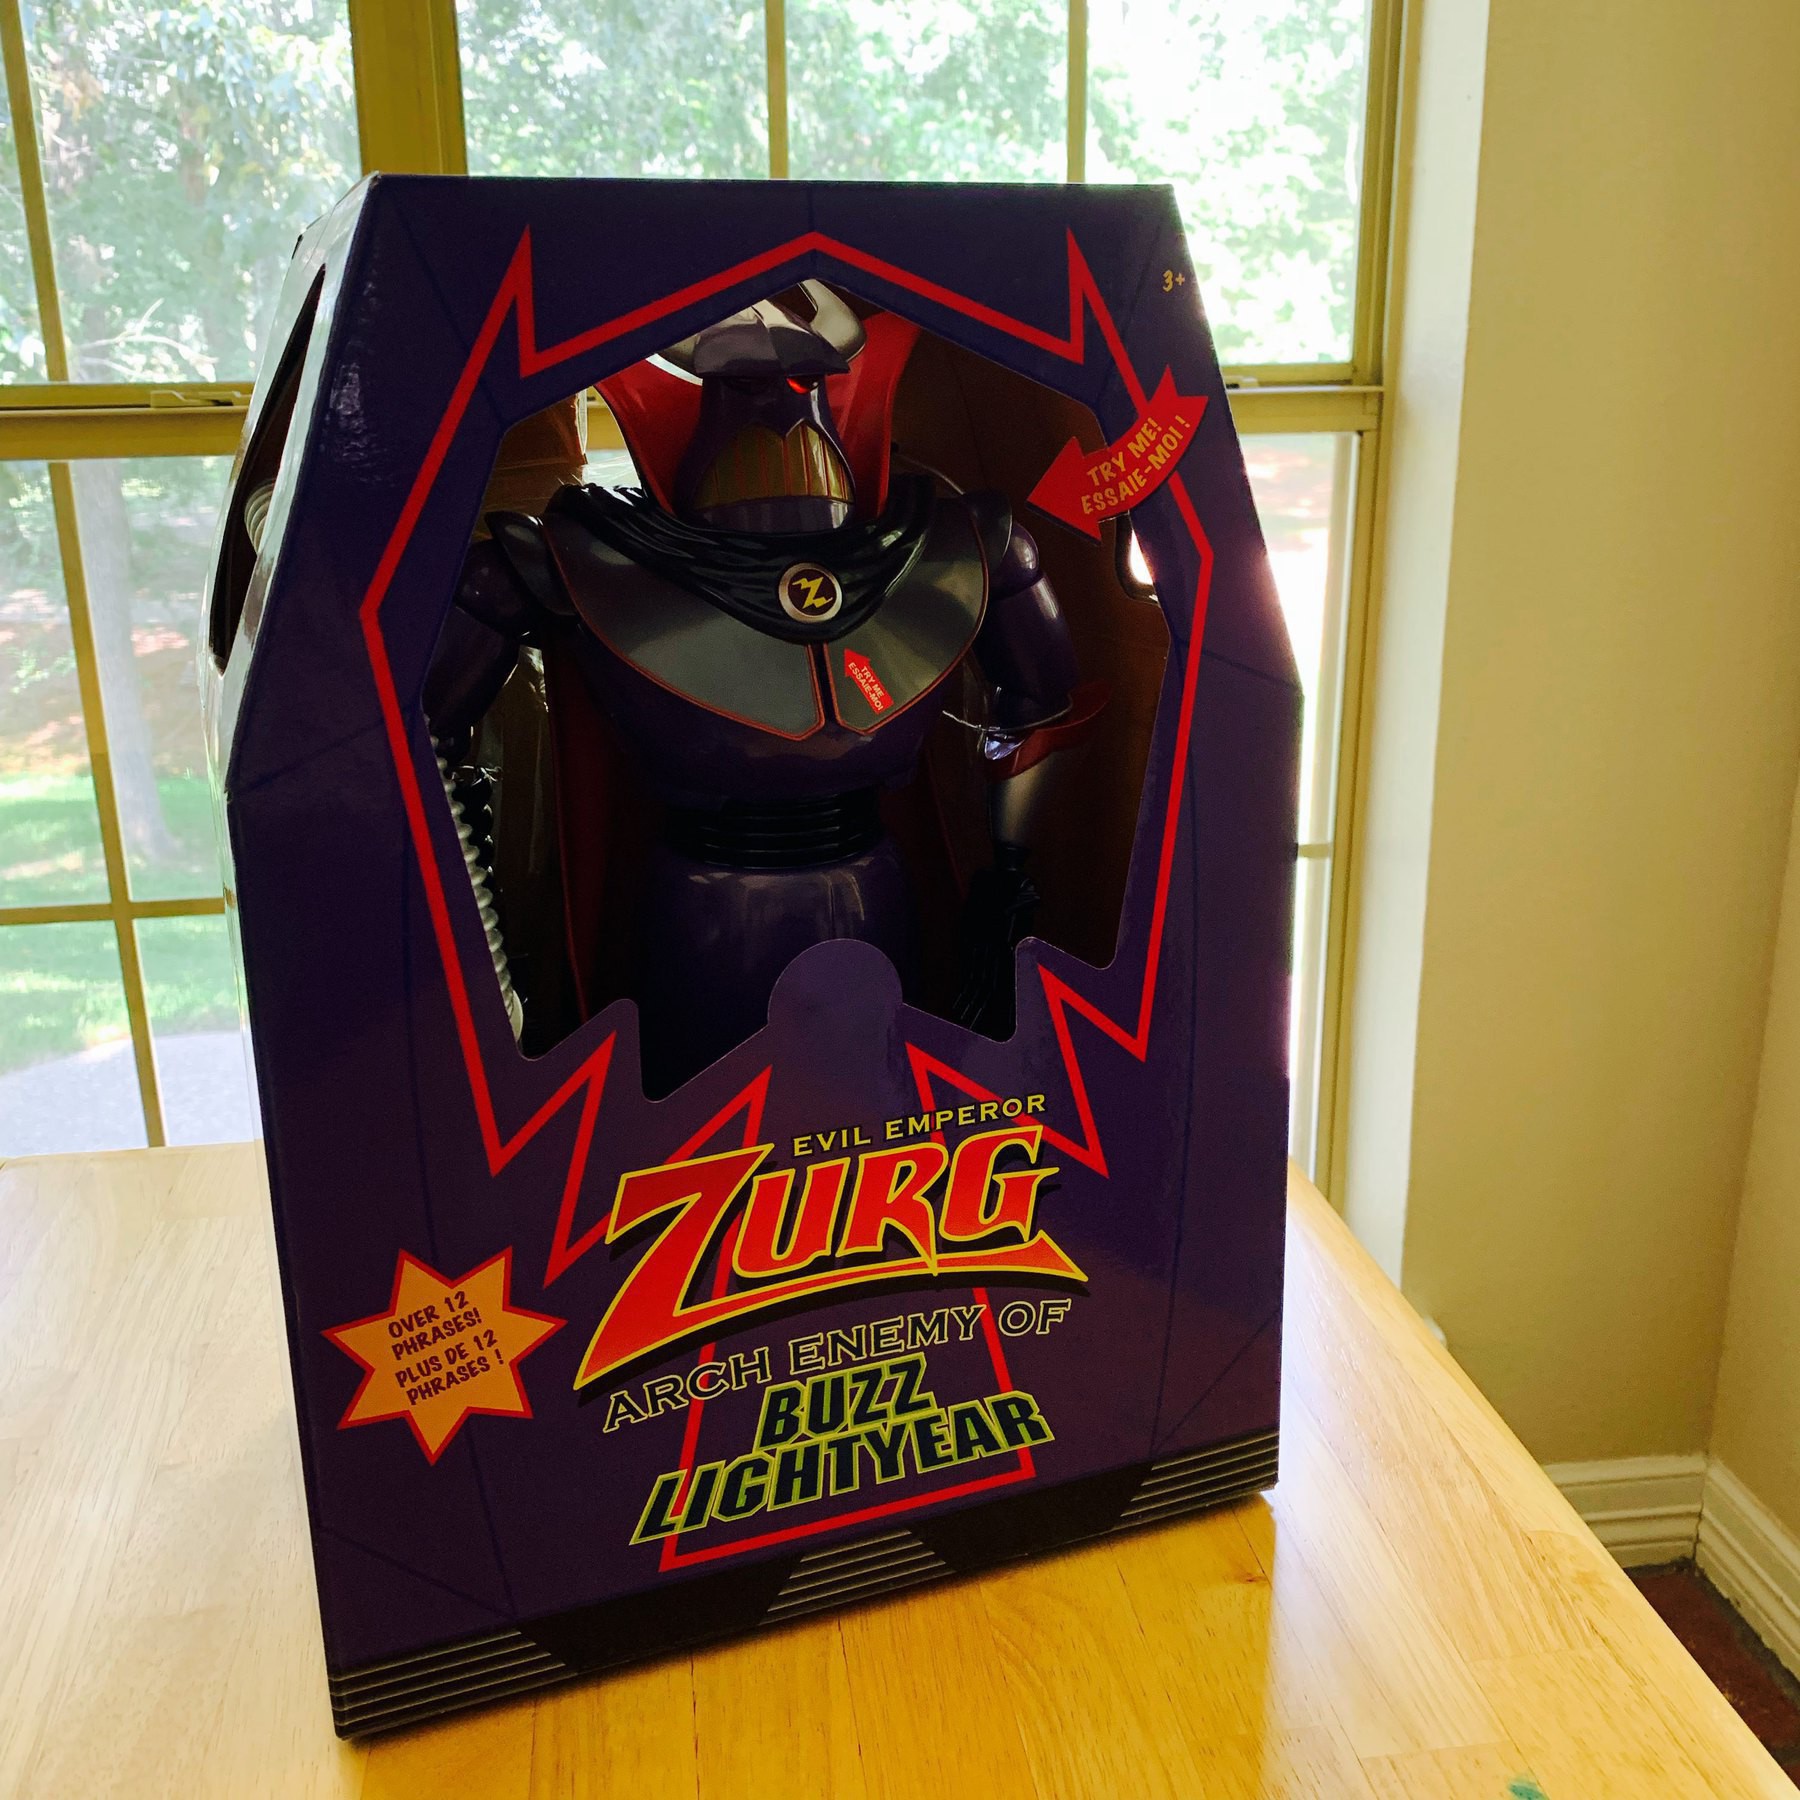 Zurg action figure from Toy Story 2